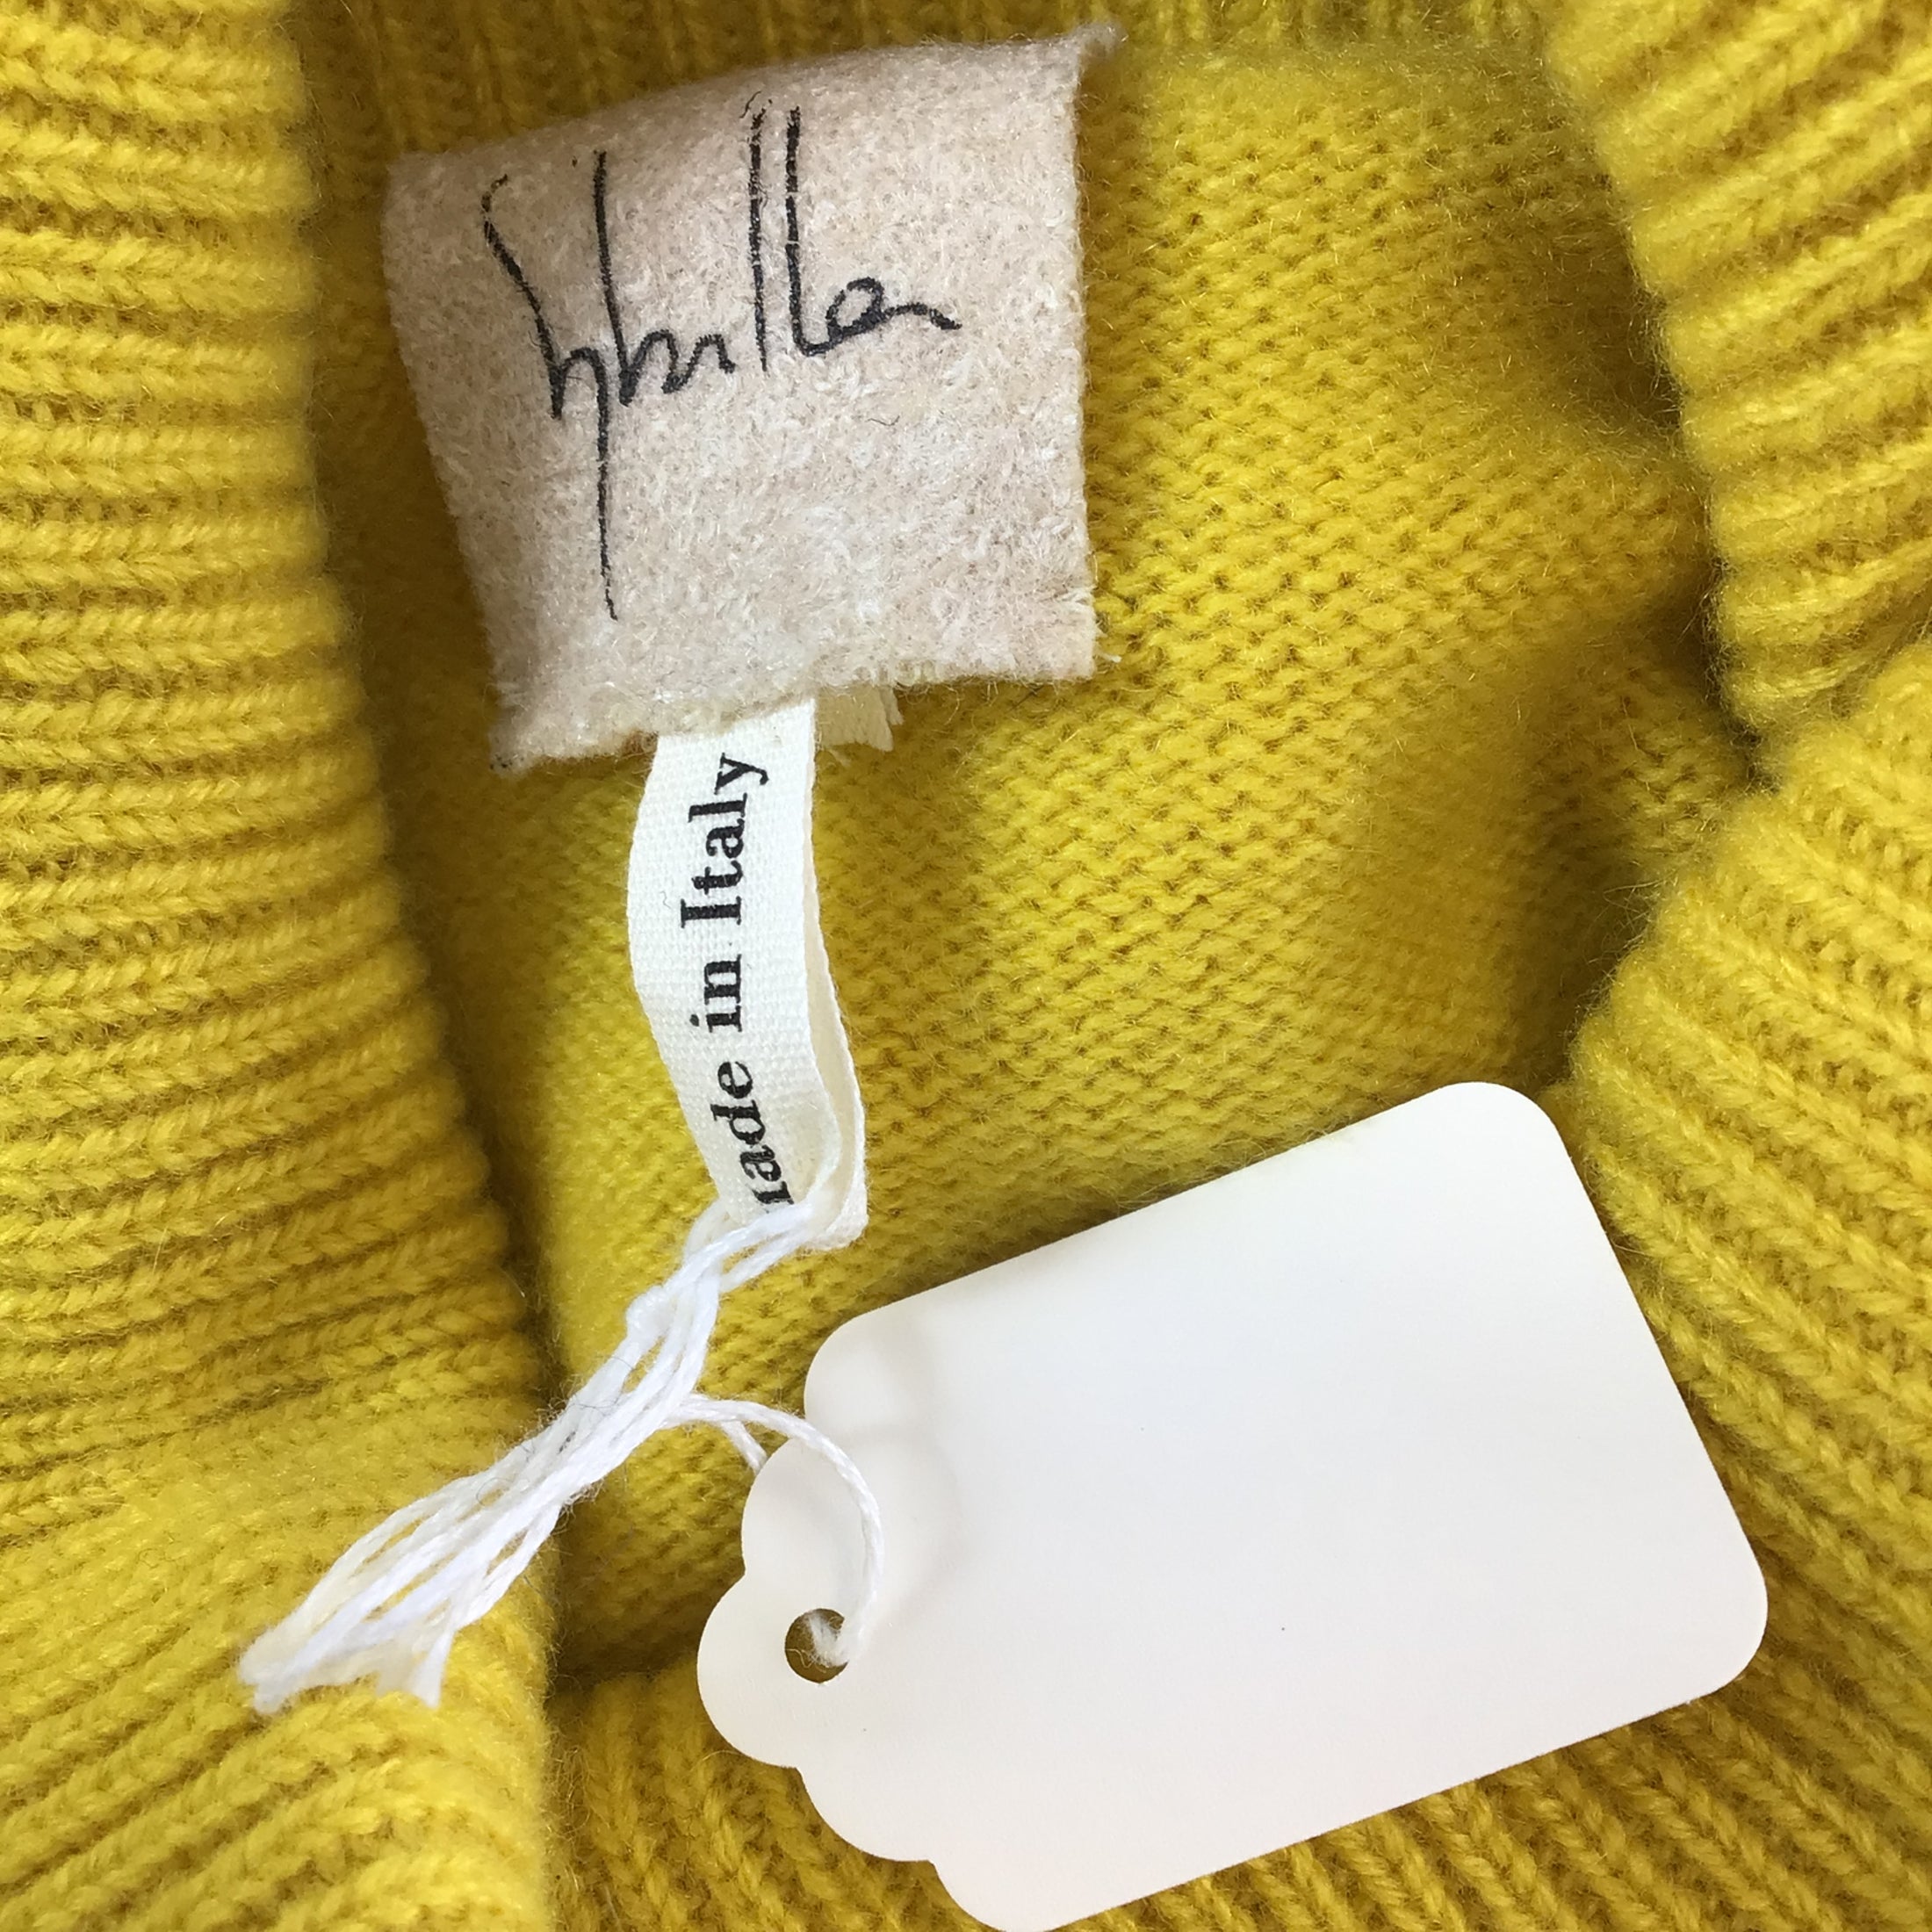 Sybilla Yellow Long Sleeved Cashmere Knit Turtleneck Sweater